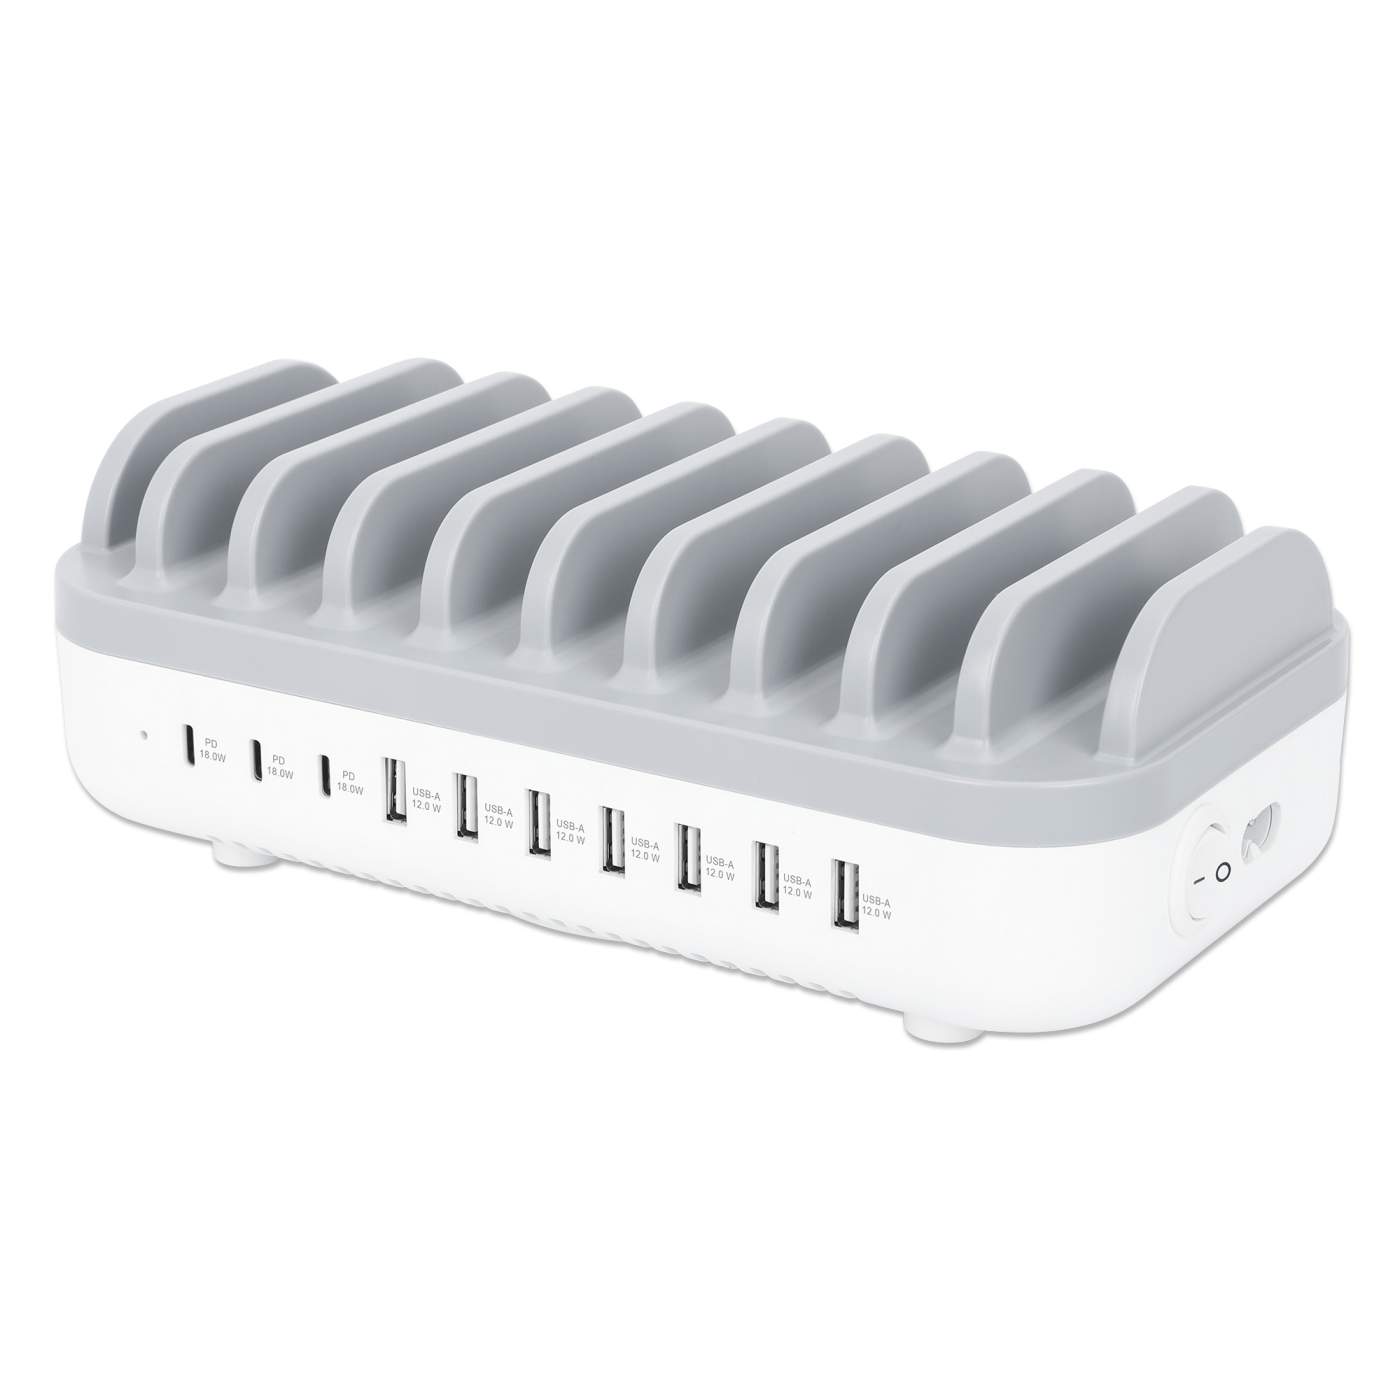 10-Port USB Power Delivery Charging Station - 120 W Image 1